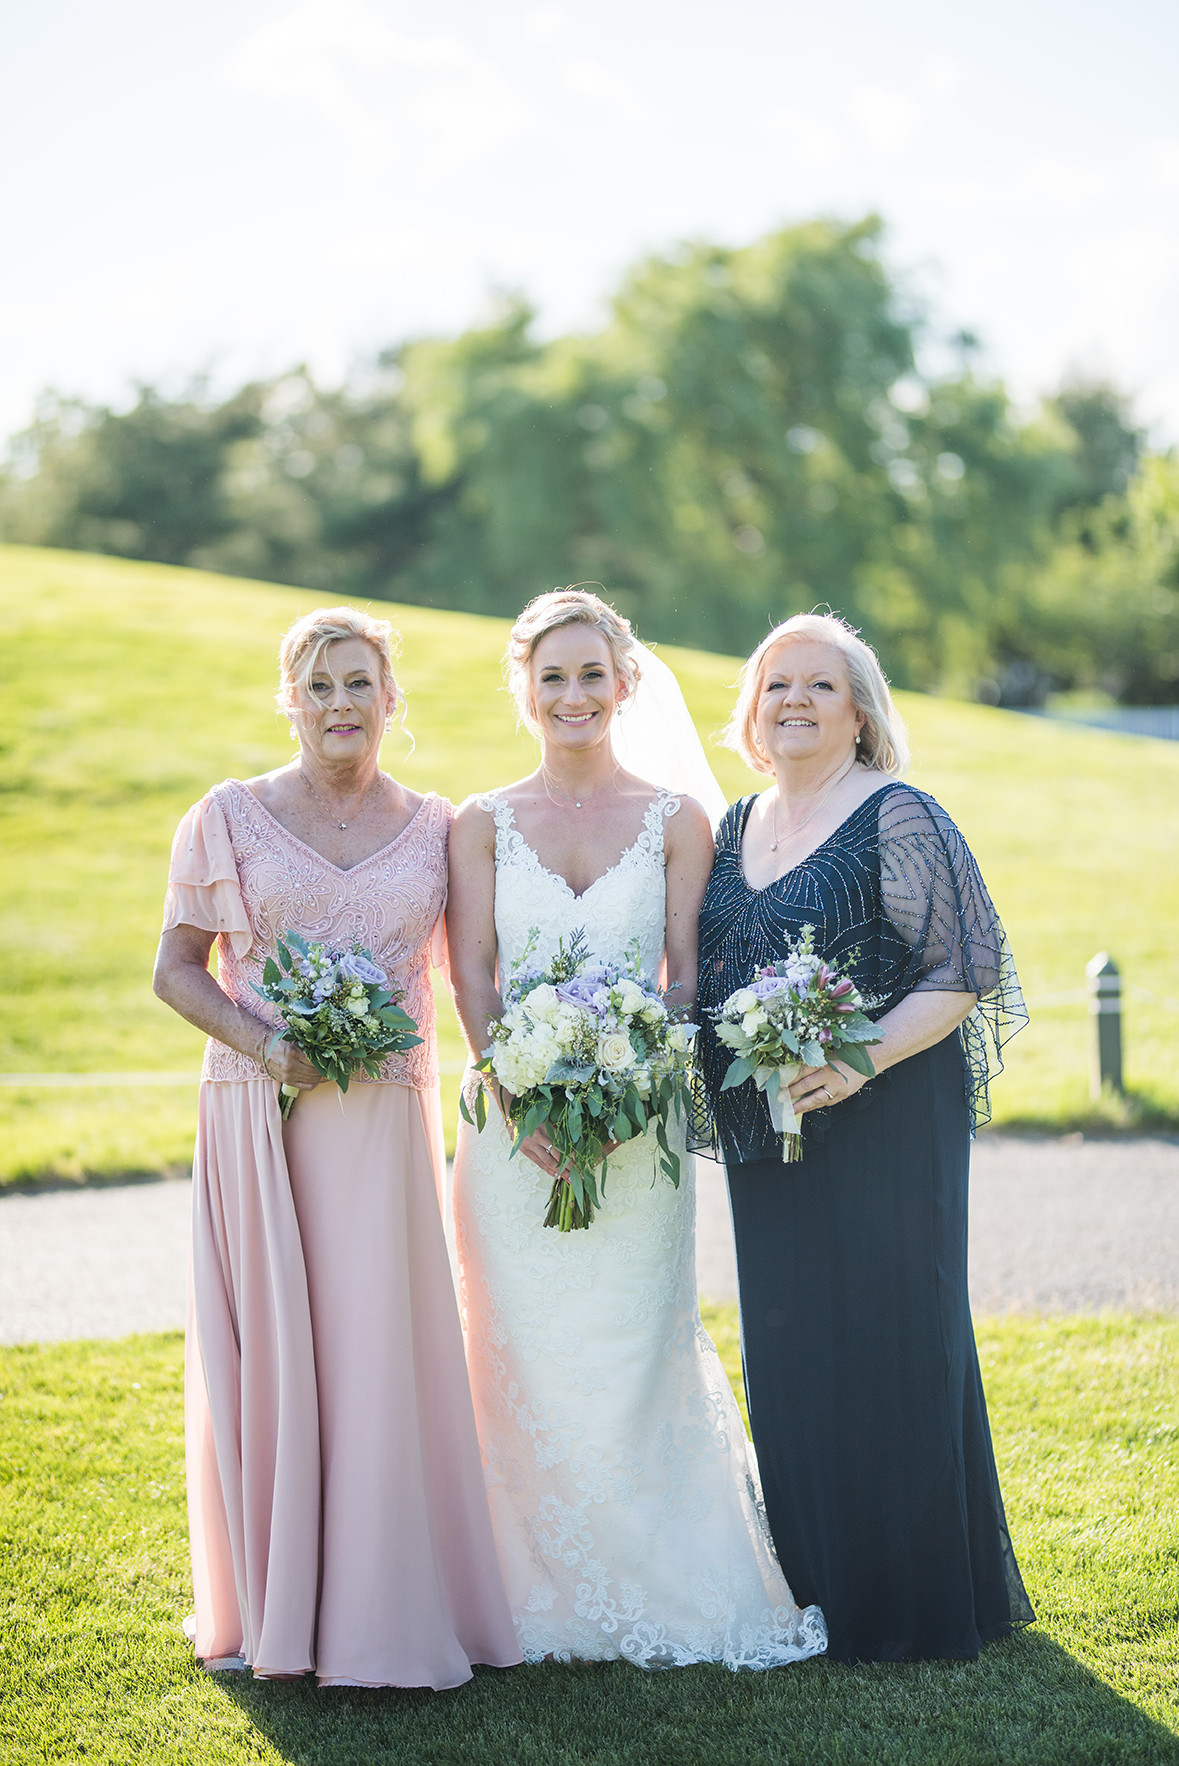 Lauren + Nick's Summer Soiree at Willow Creek Golf + Country Club